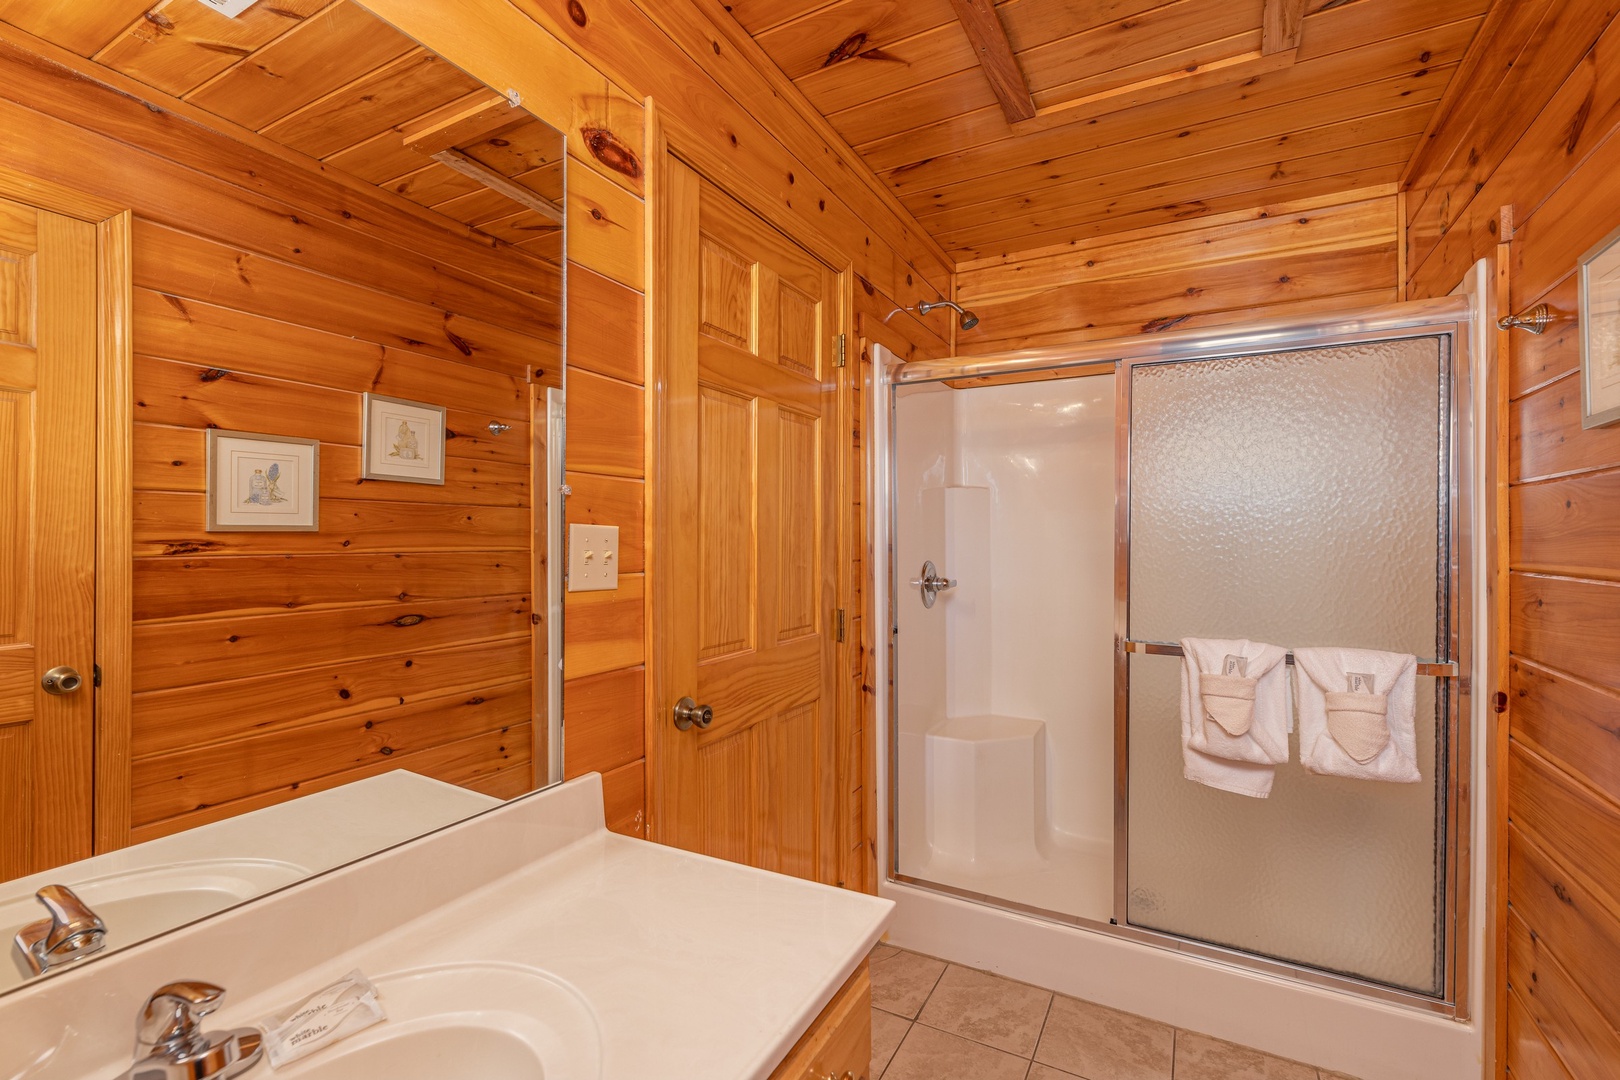 Bathroom with a shower at Hickernut Lodge, a 5-bedroom cabin rental located in Pigeon Forge